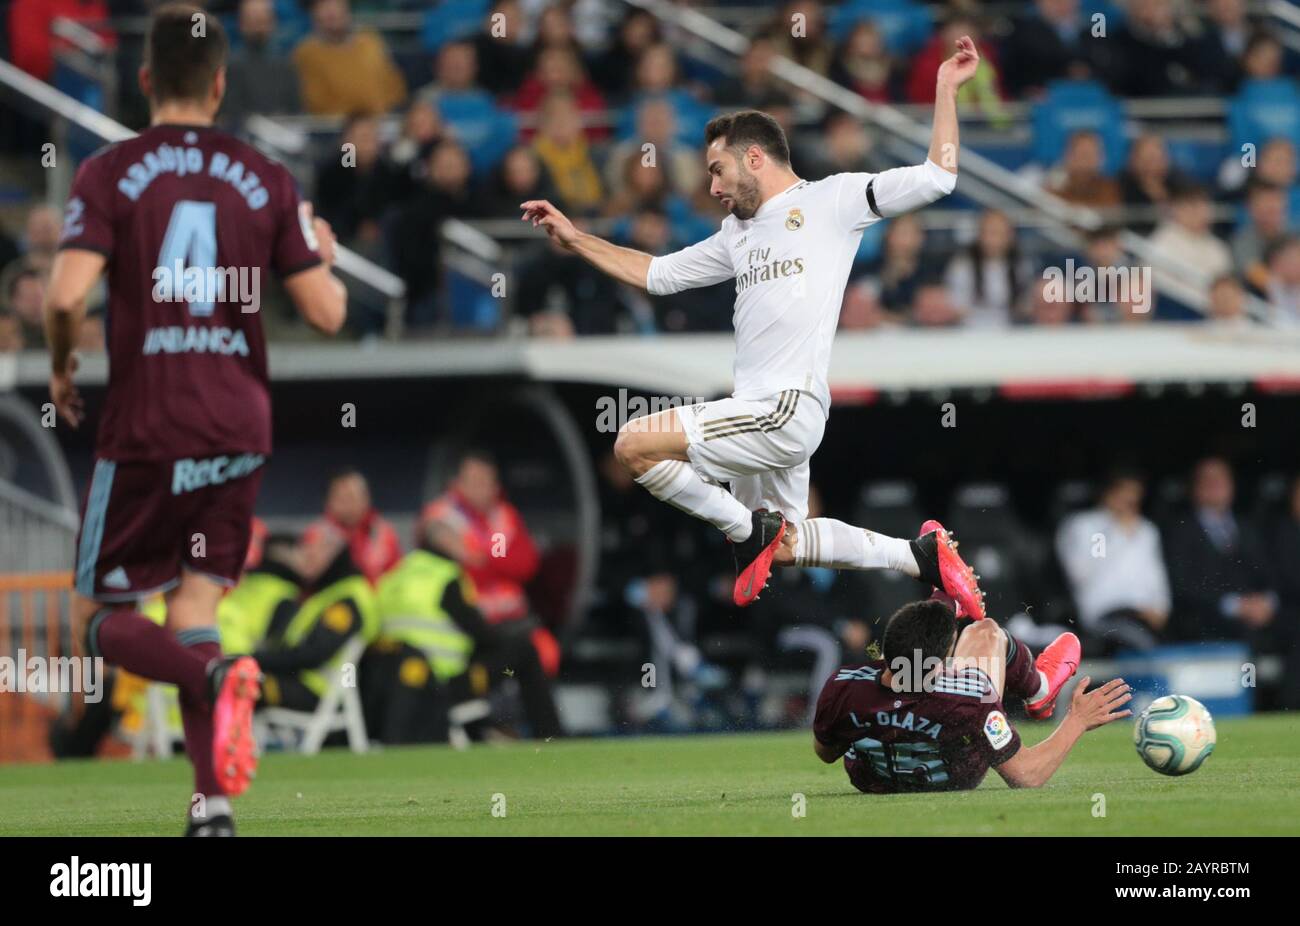 Madrid, Spain. 16th Feb, 2020. Madrid, Spain; 016/02/2020.- Real Madrid vs Celta Soccer to La Liga Spain match 24 held at the Santiago Bernabeu stadium, in Madrid. Carvajal (L) Real de Madrid player and L. Olaza Celta player. Final score 2-2. Credit: Juan Carlos Rojas/Picture Alliance | usage worldwide/dpa/Alamy Live News Stock Photo